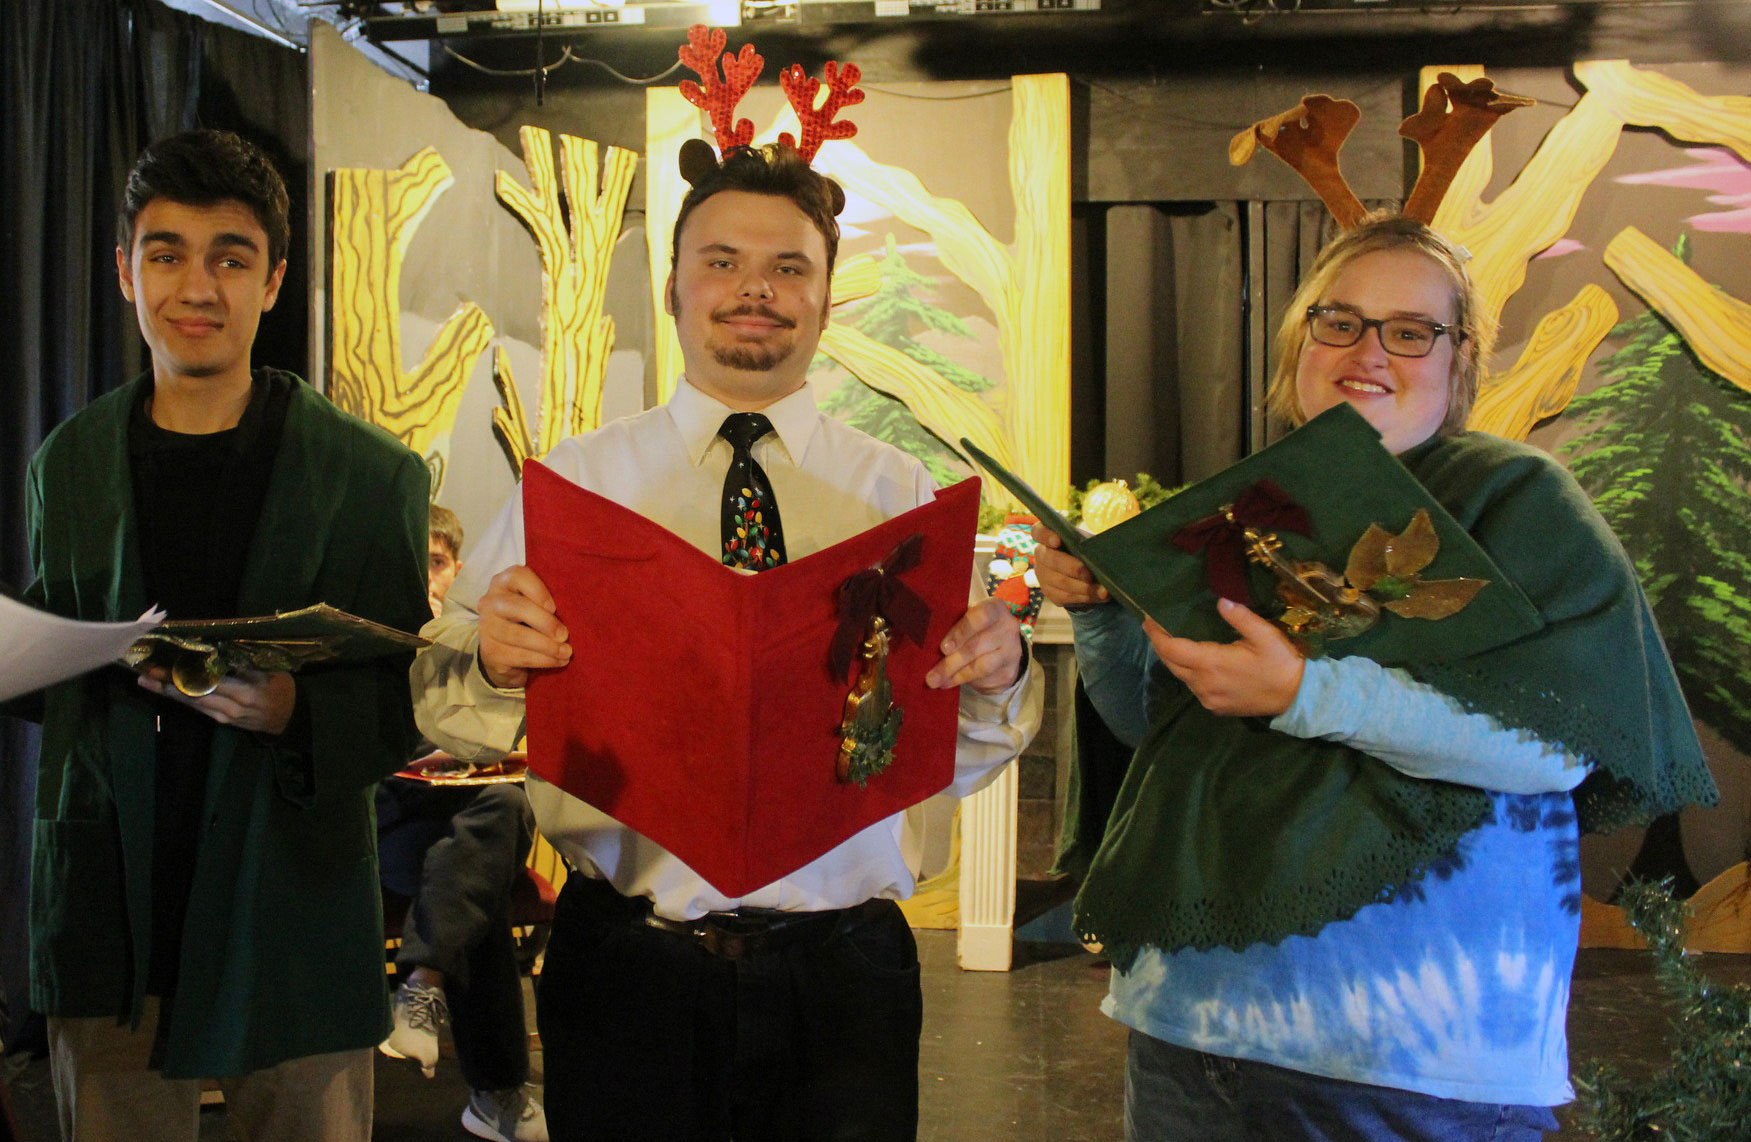 Three participants in the play "How the Grinch Stole Christmas" wear costumes and hold decorated song books while standing in a black box theater with wooded scenery.